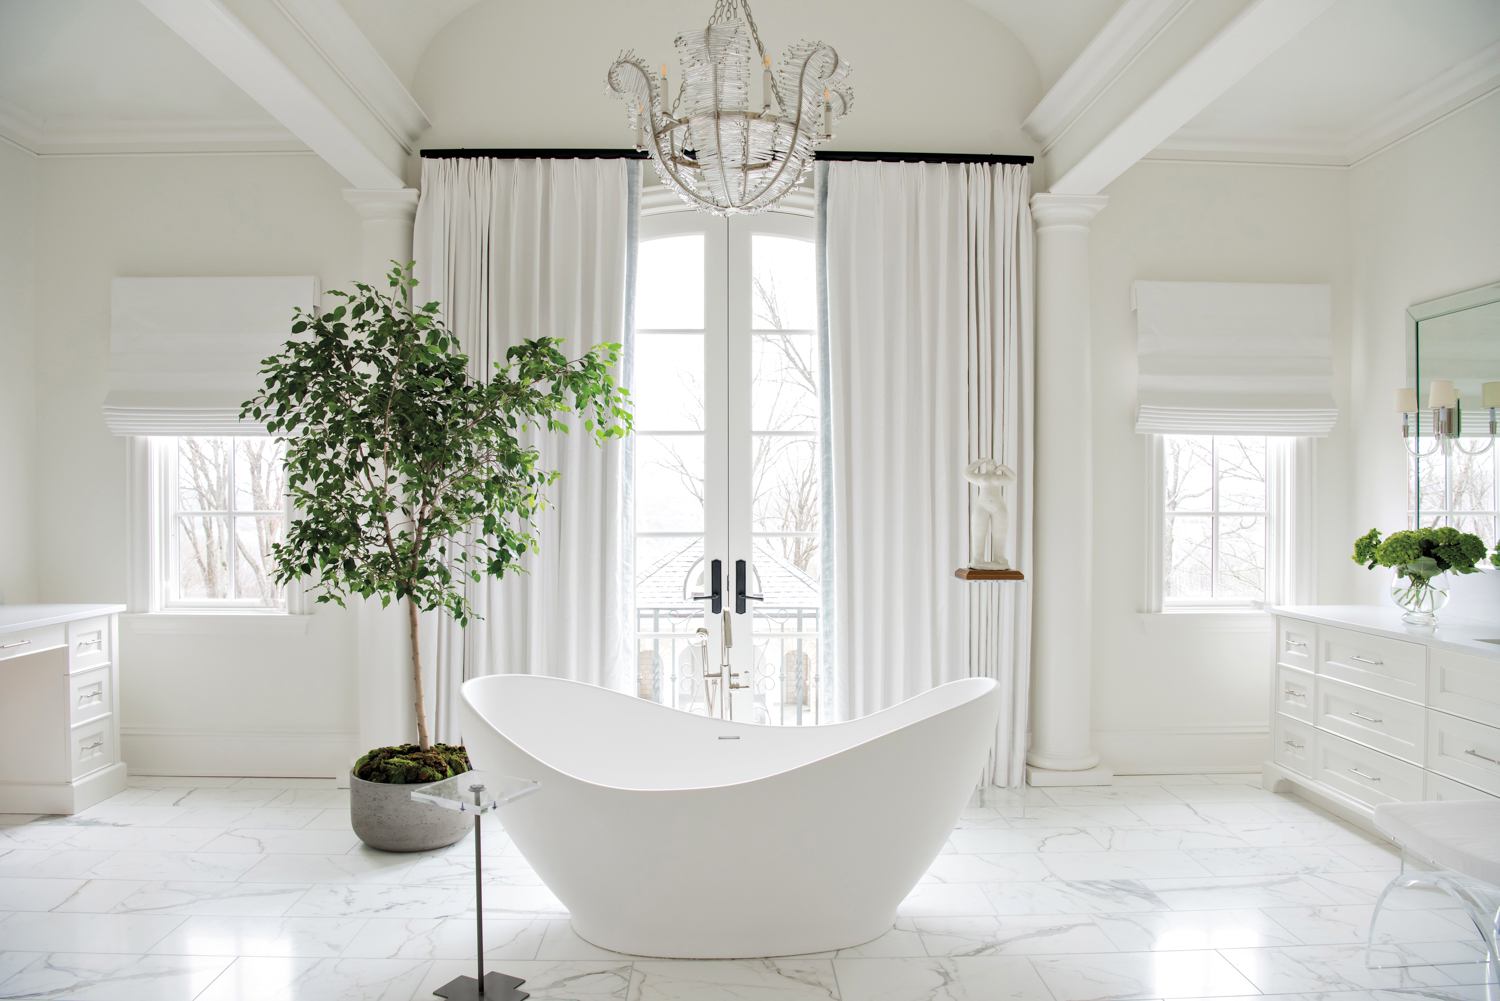 Sunlit bathroom with white finishes,...